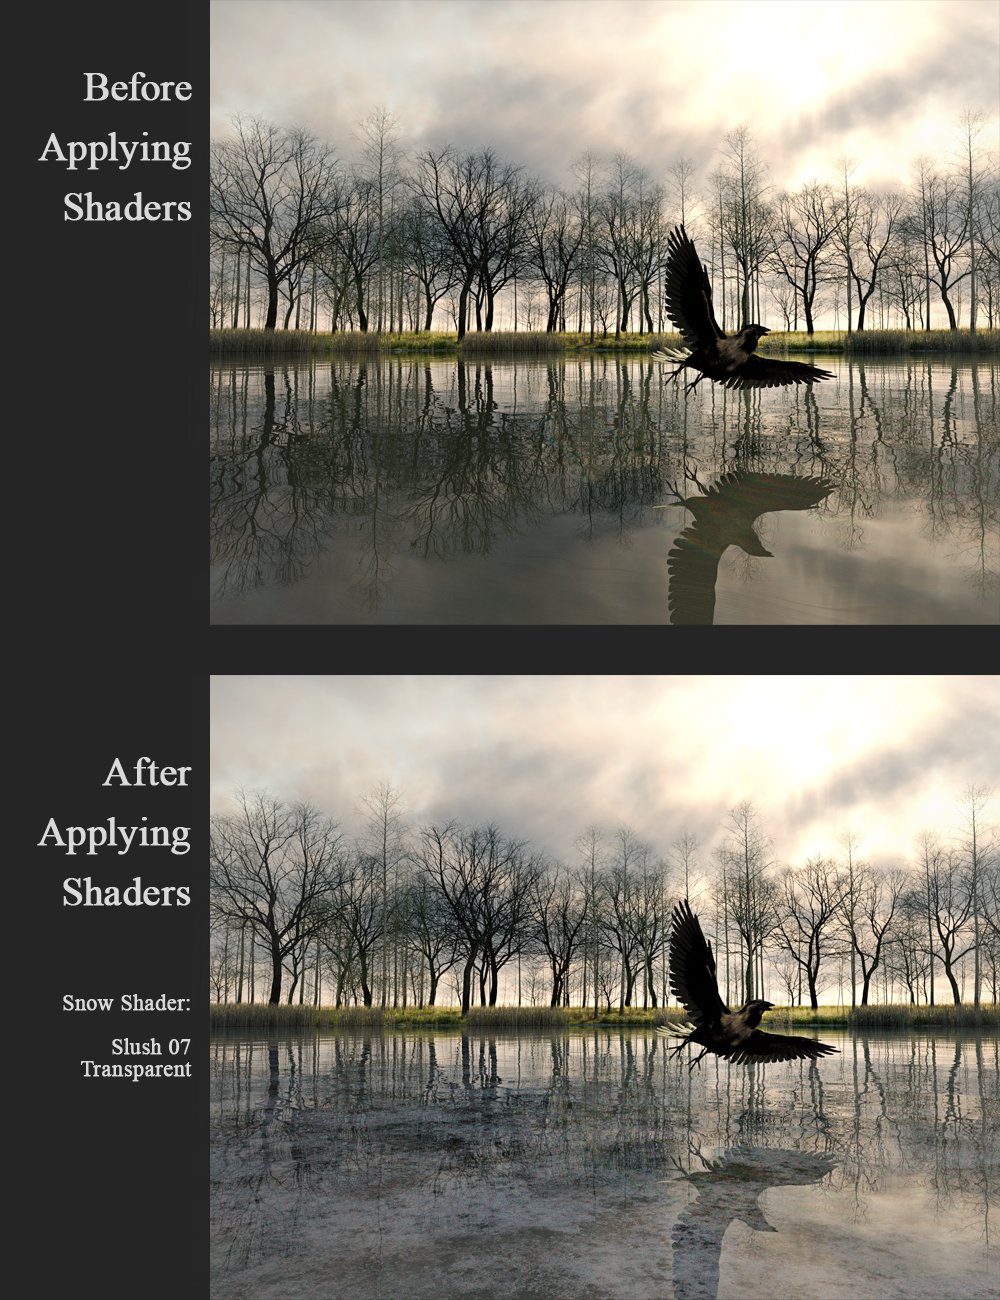 Before and After snow shaders applied to winter lake